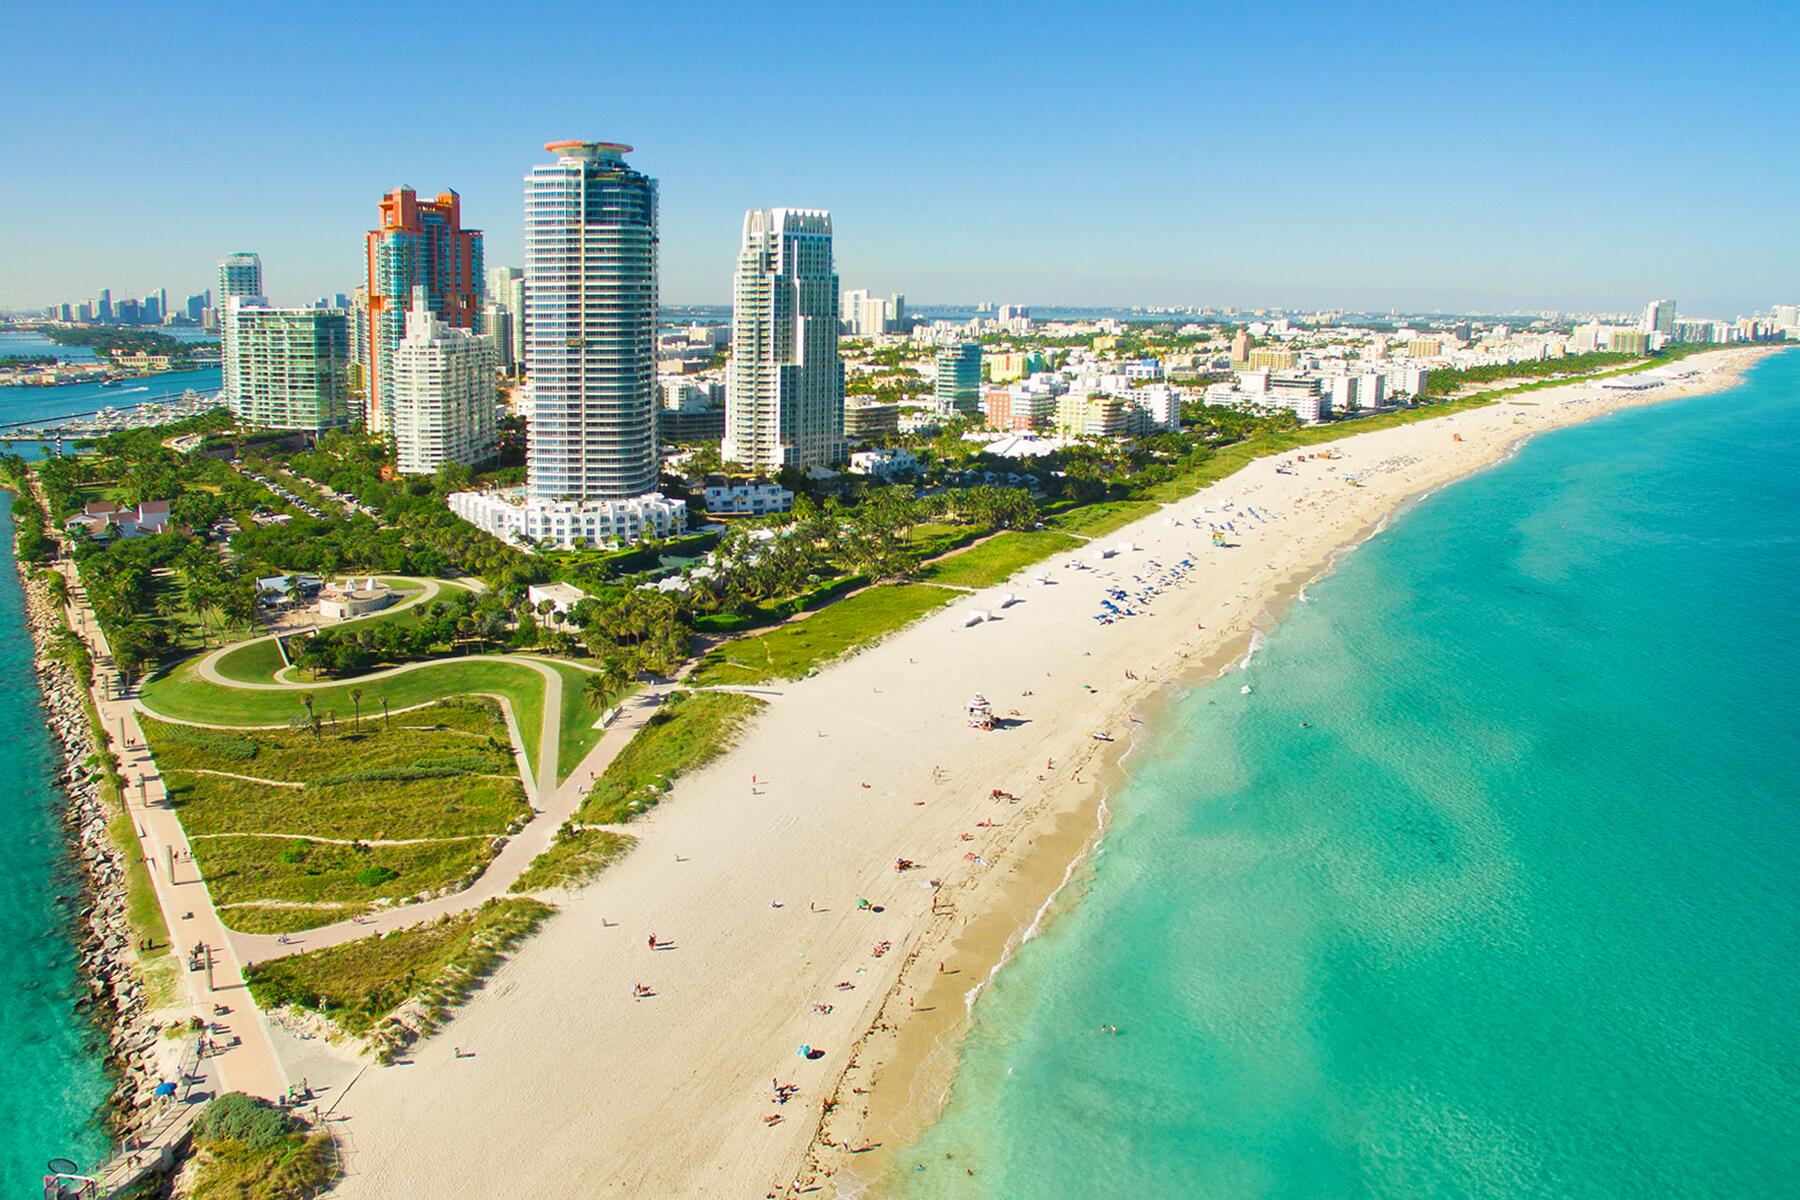 <a href='https://www.fodors.com/world/north-america/usa/florida/miami/experiences/news/photos/the-10-best-beaches-in-miami#'>From &quot;The 12 Best Beaches in Miami: Best Urban Beach in Miami: South Pointe Park&quot;</a>